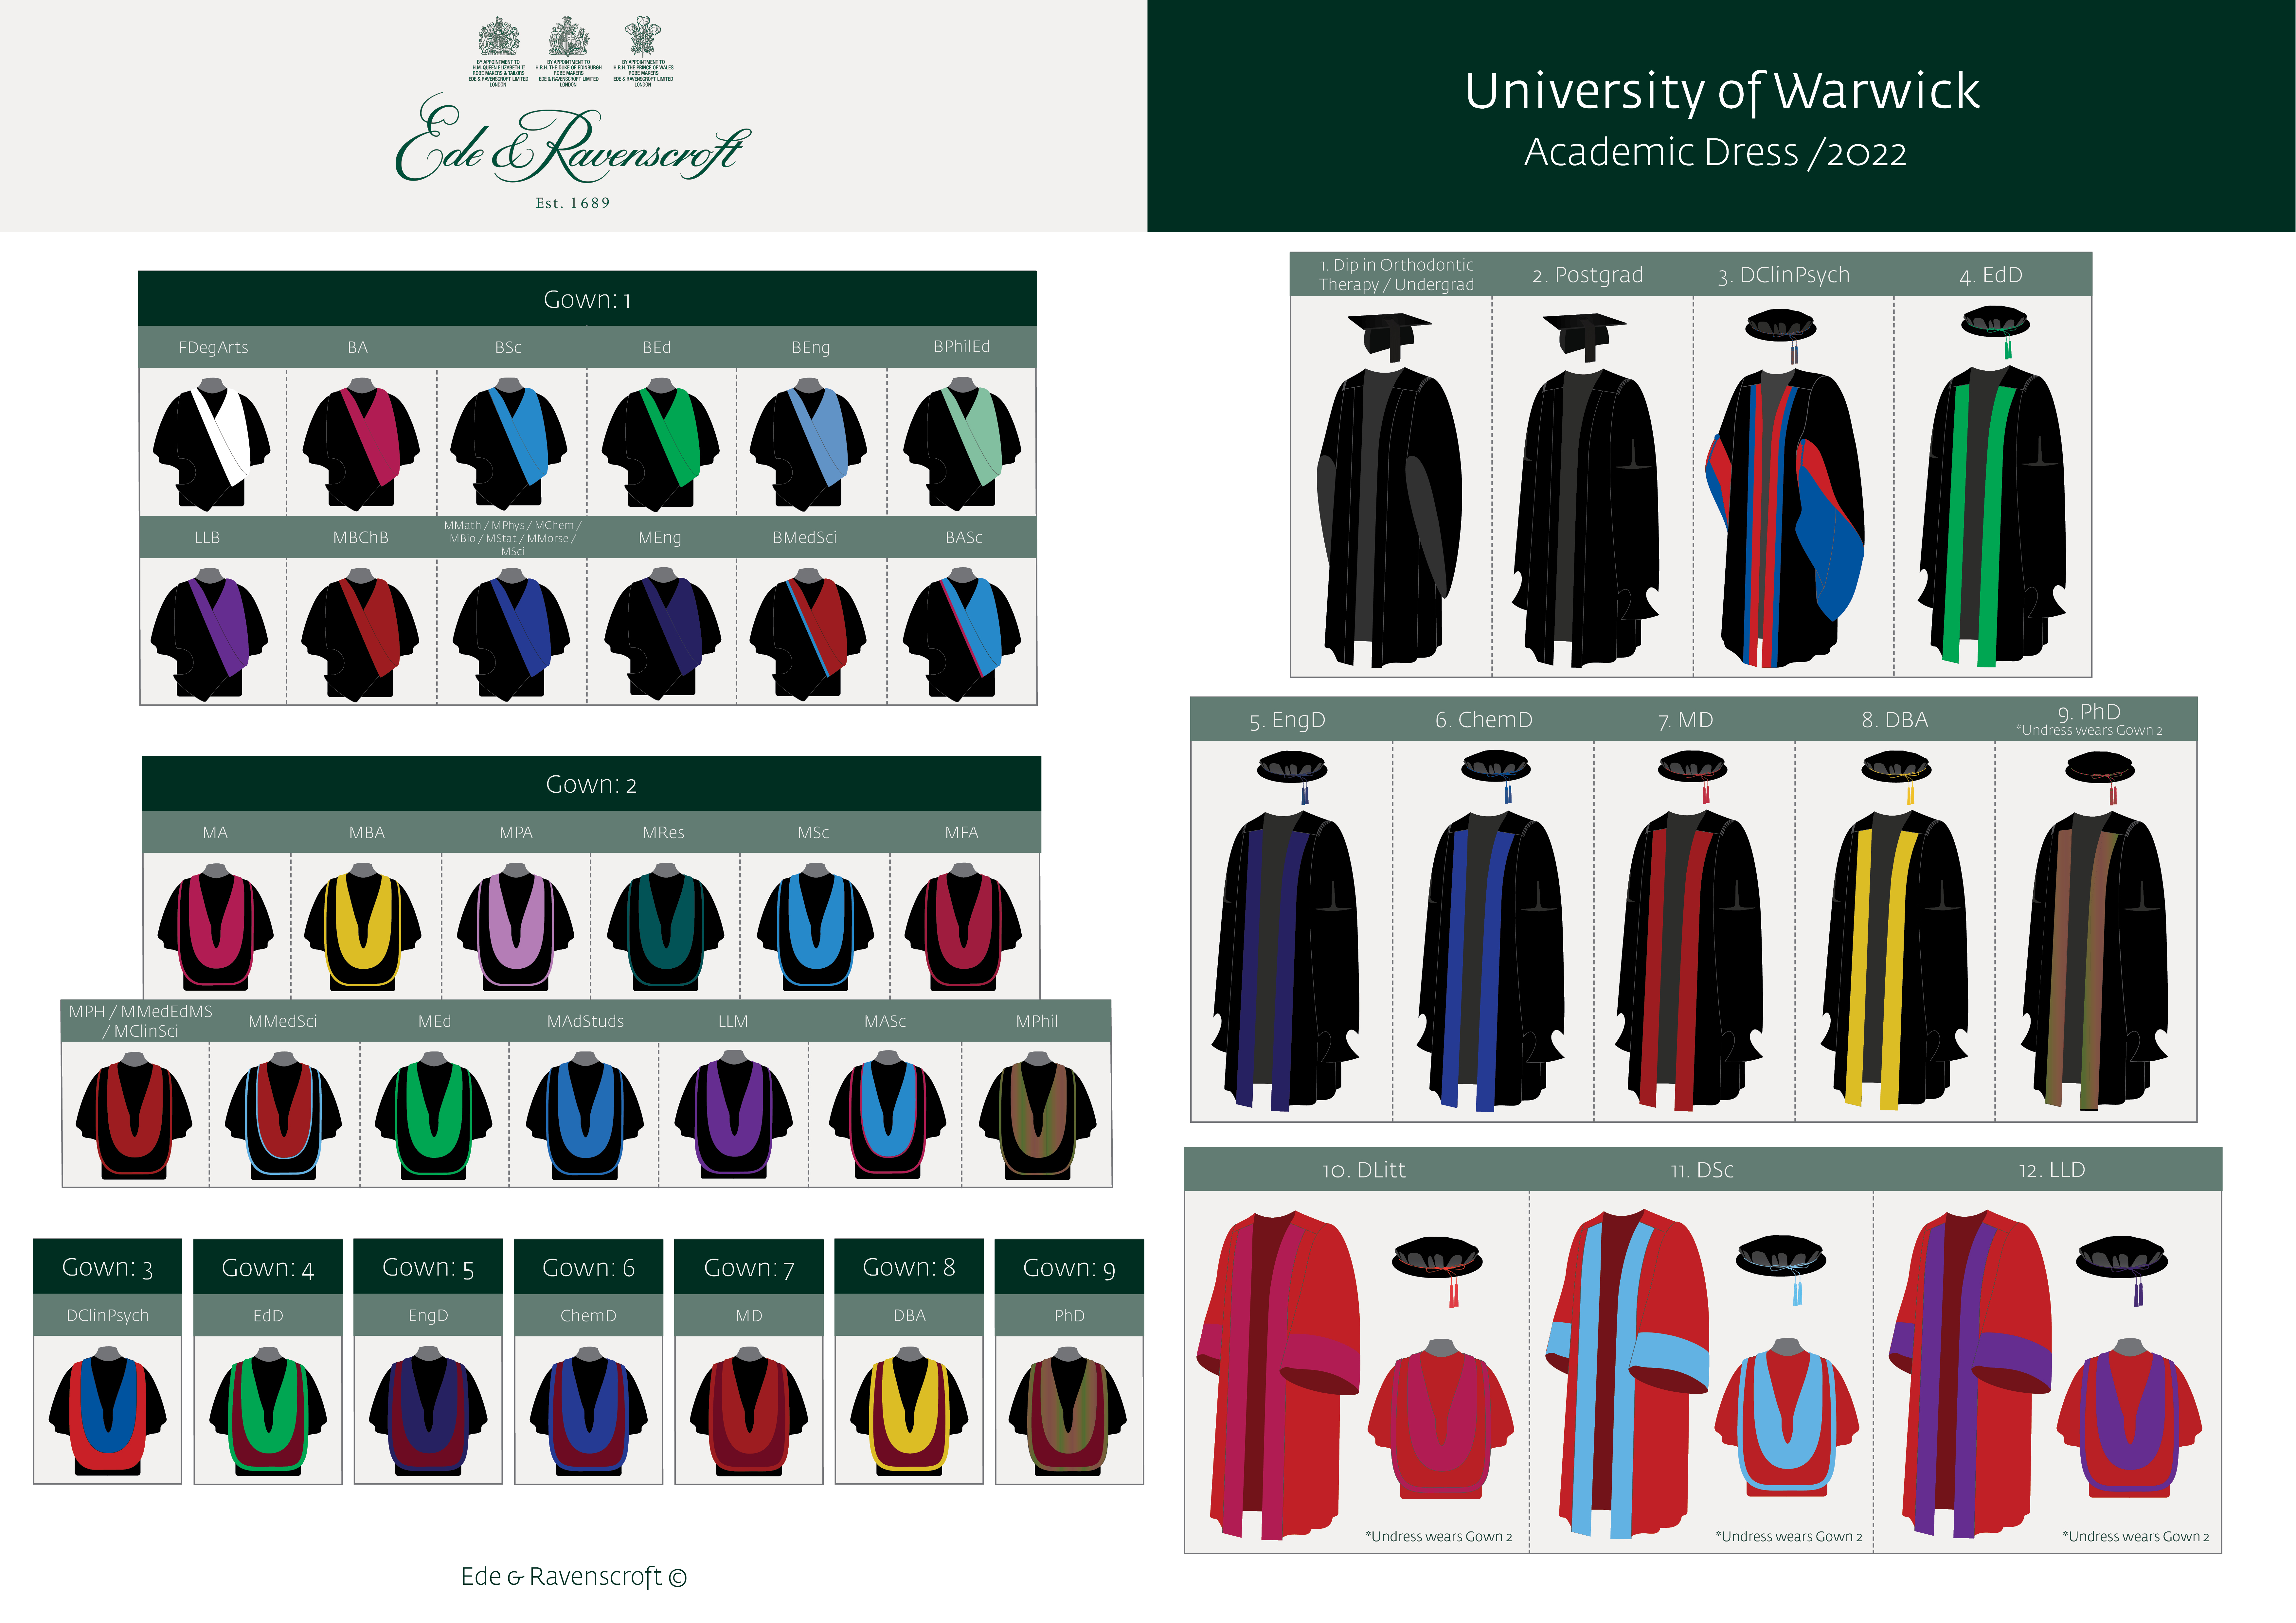 Image of the different academic dress for University of Warwick qualifications